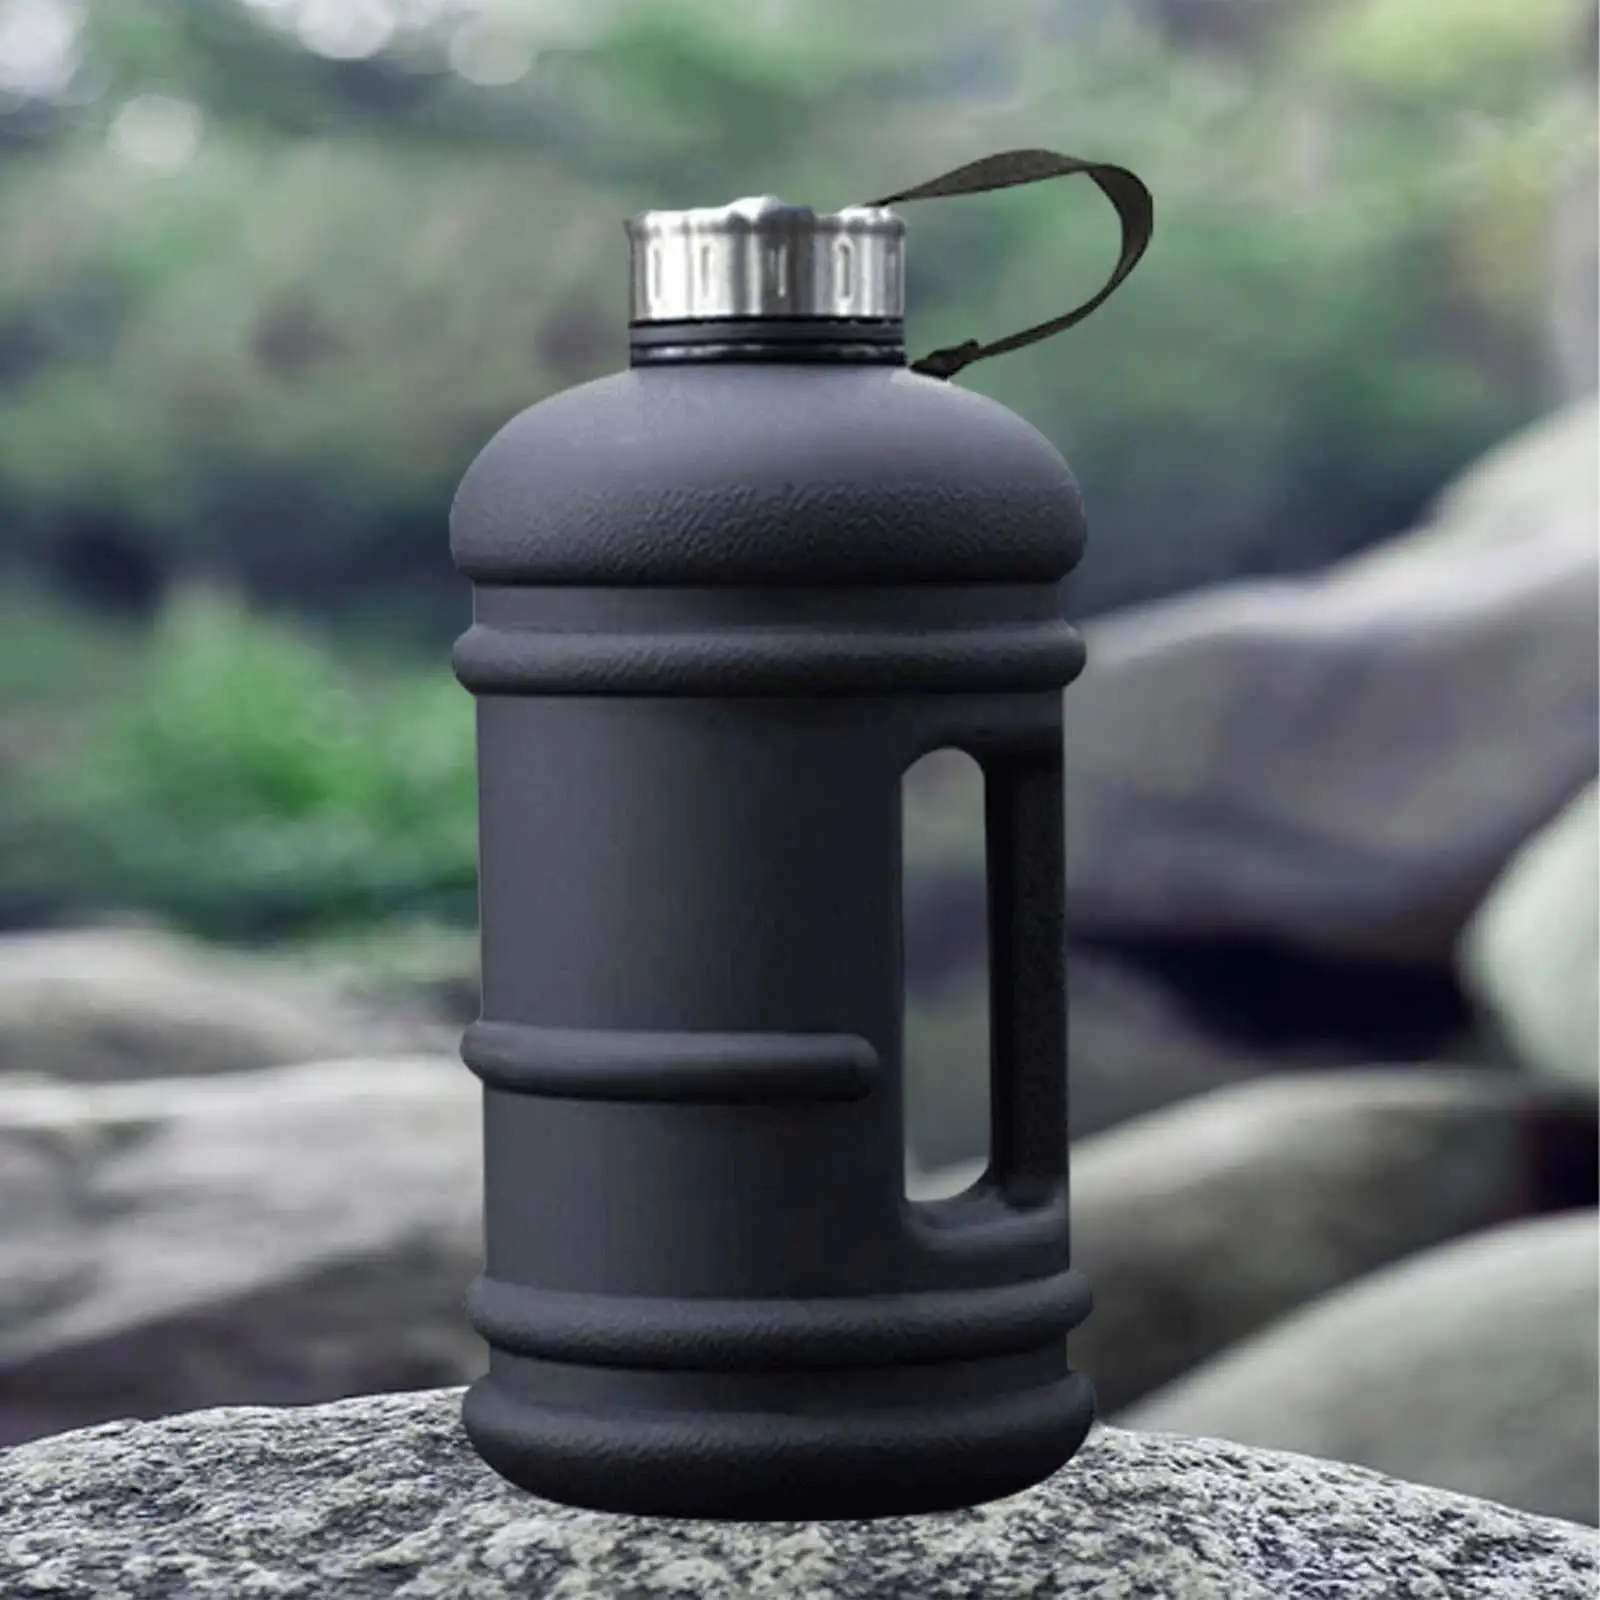 Water Bottle Handle Juice Containers 2.2L Large Capacity Leakproof Drinking Bottles for Camping Sports Outdoors Fitness Hiking